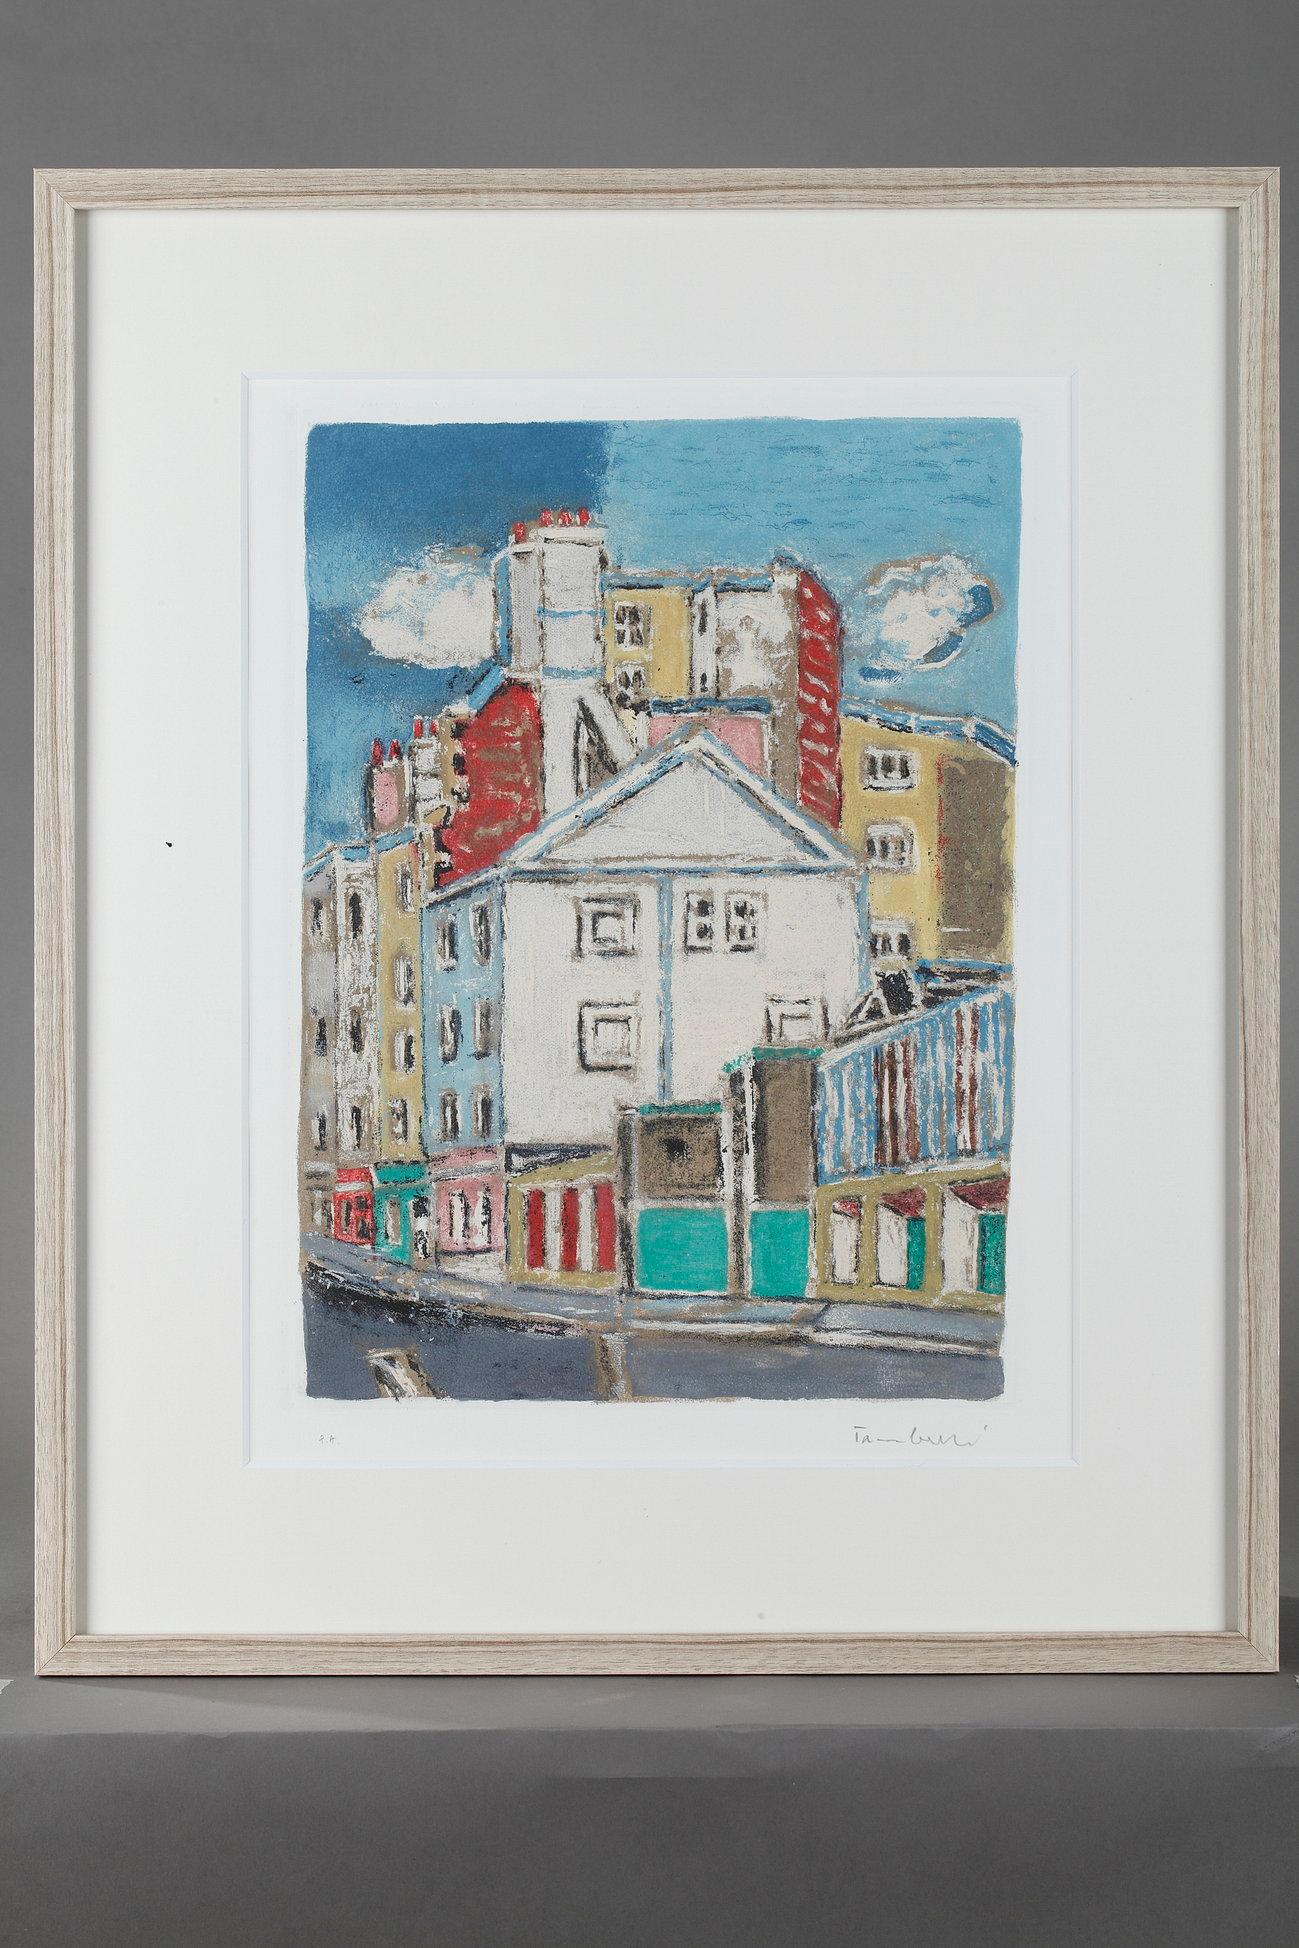 Set of four etchings by Orfeo Tamburini and aquatint in colors representing the streets of Paris. Each one is signed by the artist in pencil and stamped by the art publisher Il Cigno in Rome. These are limited editions of 130 copies made between